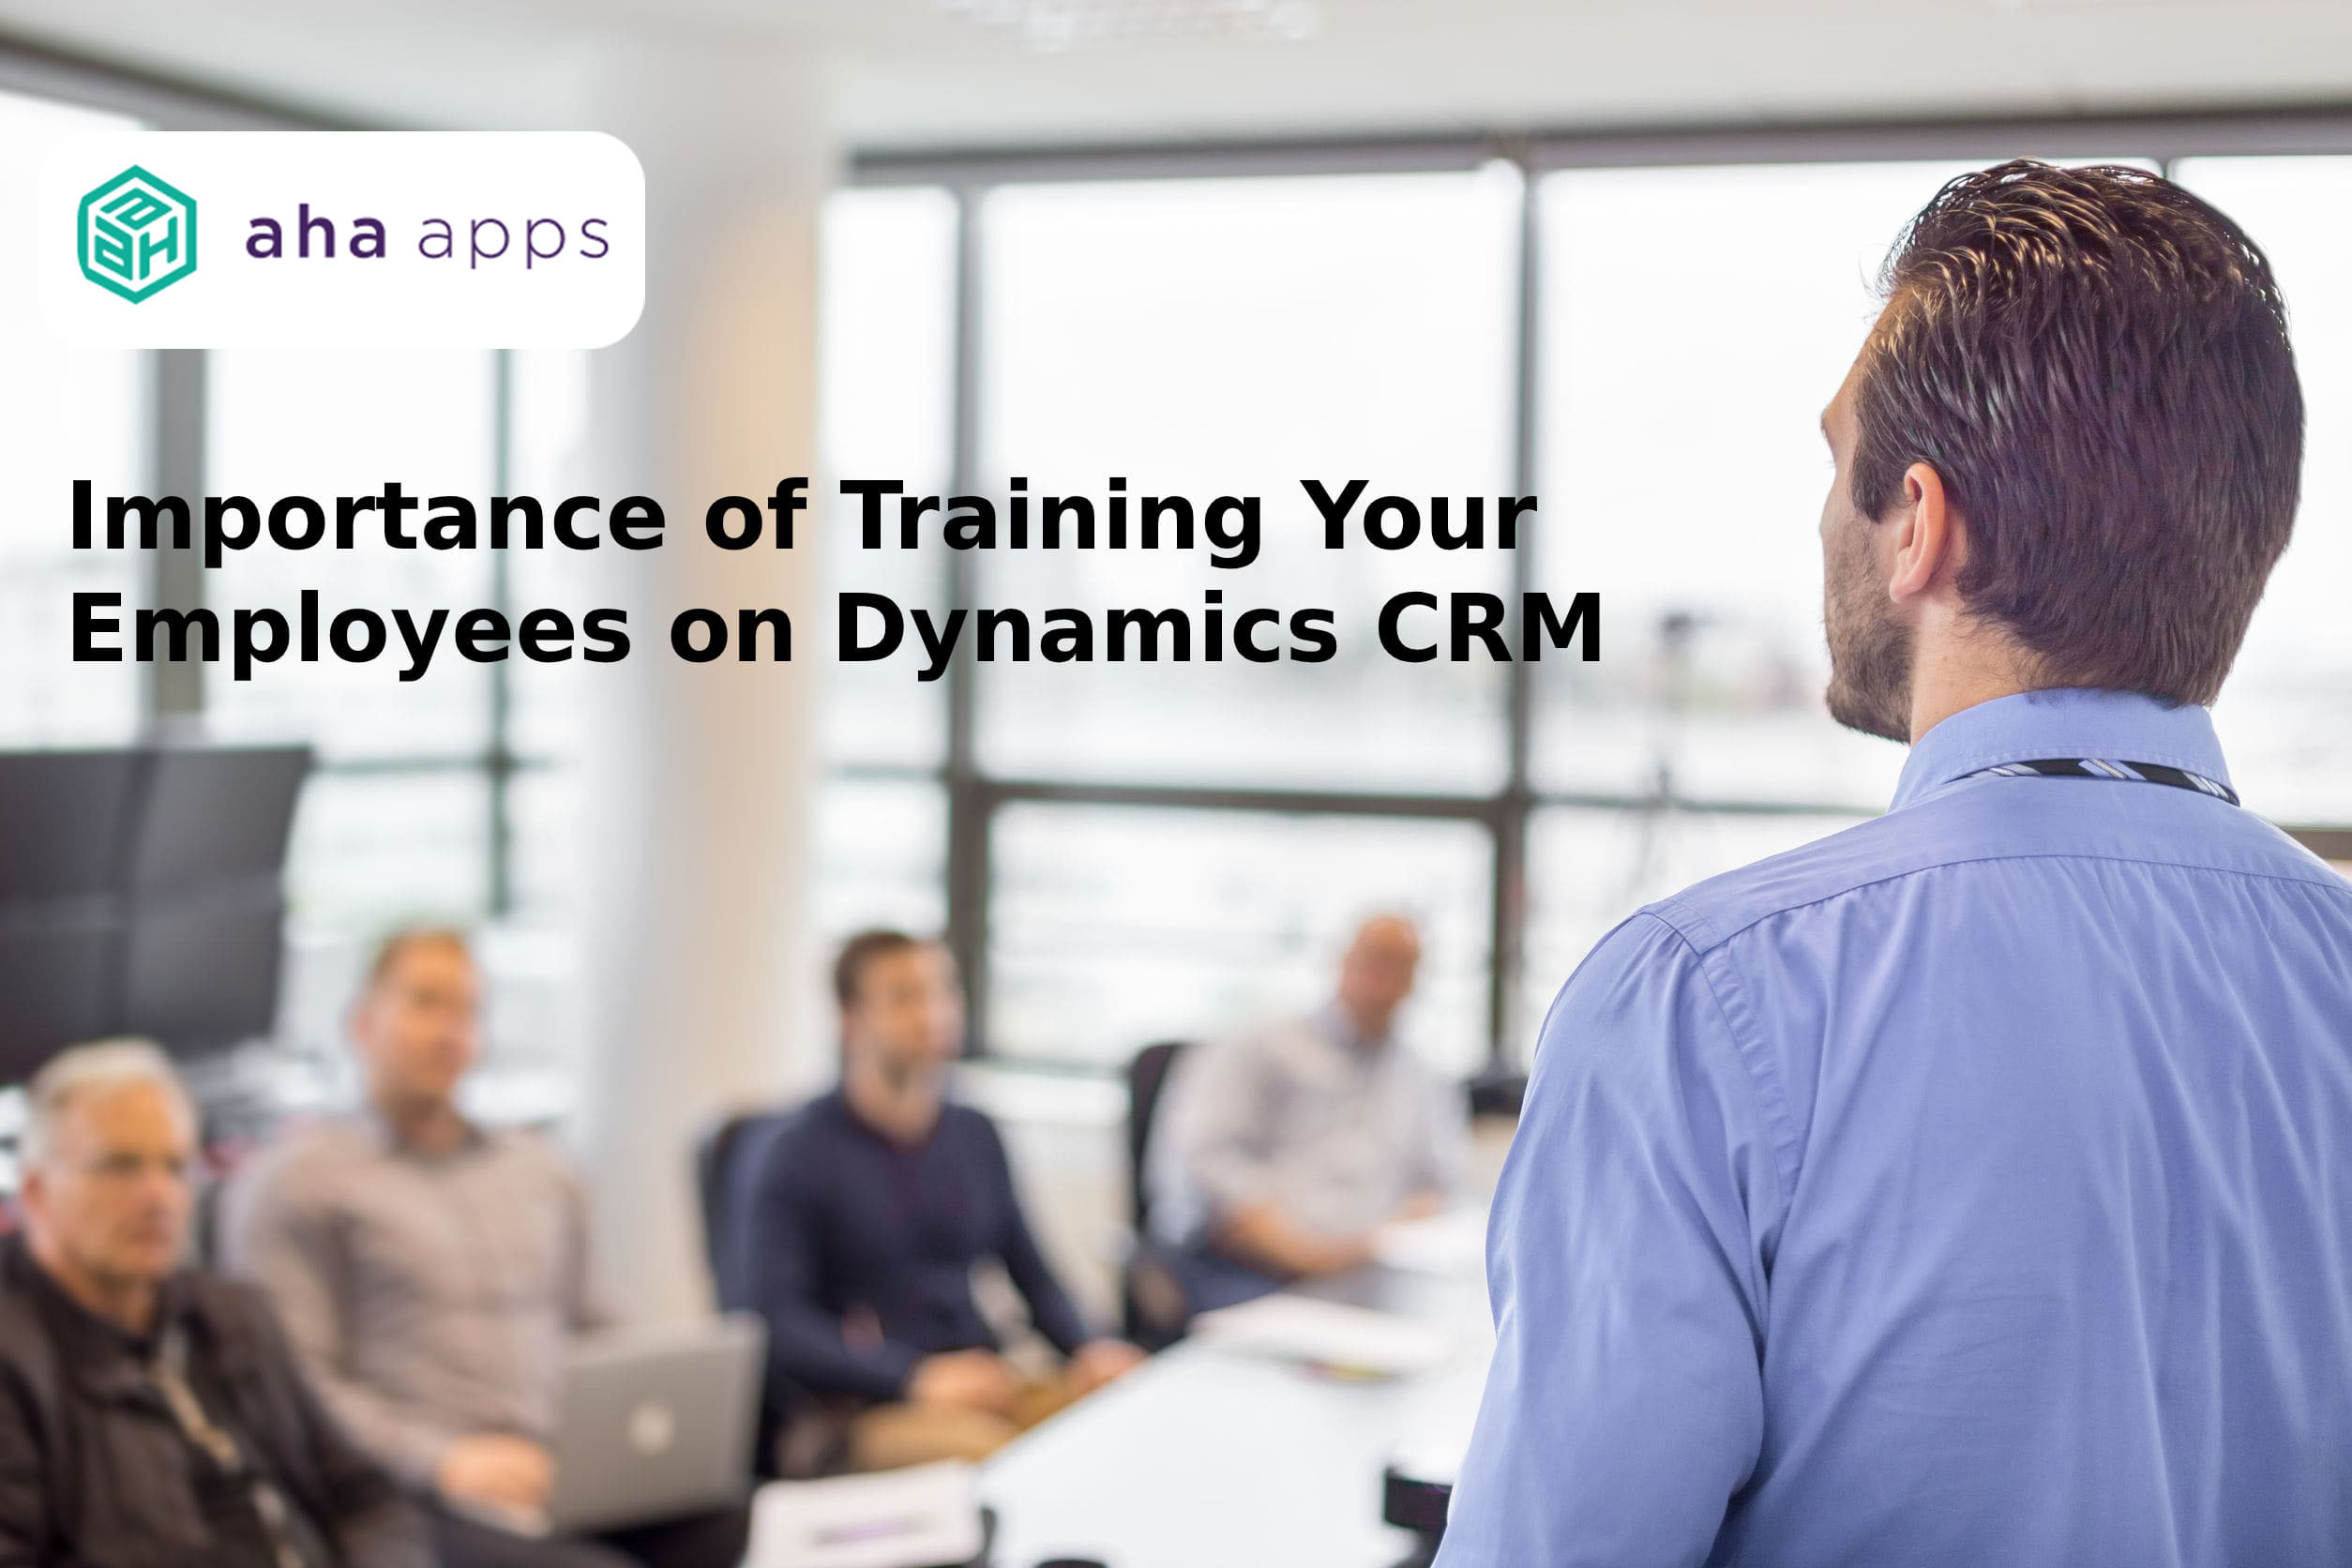 training your employees on Dynamics CRM